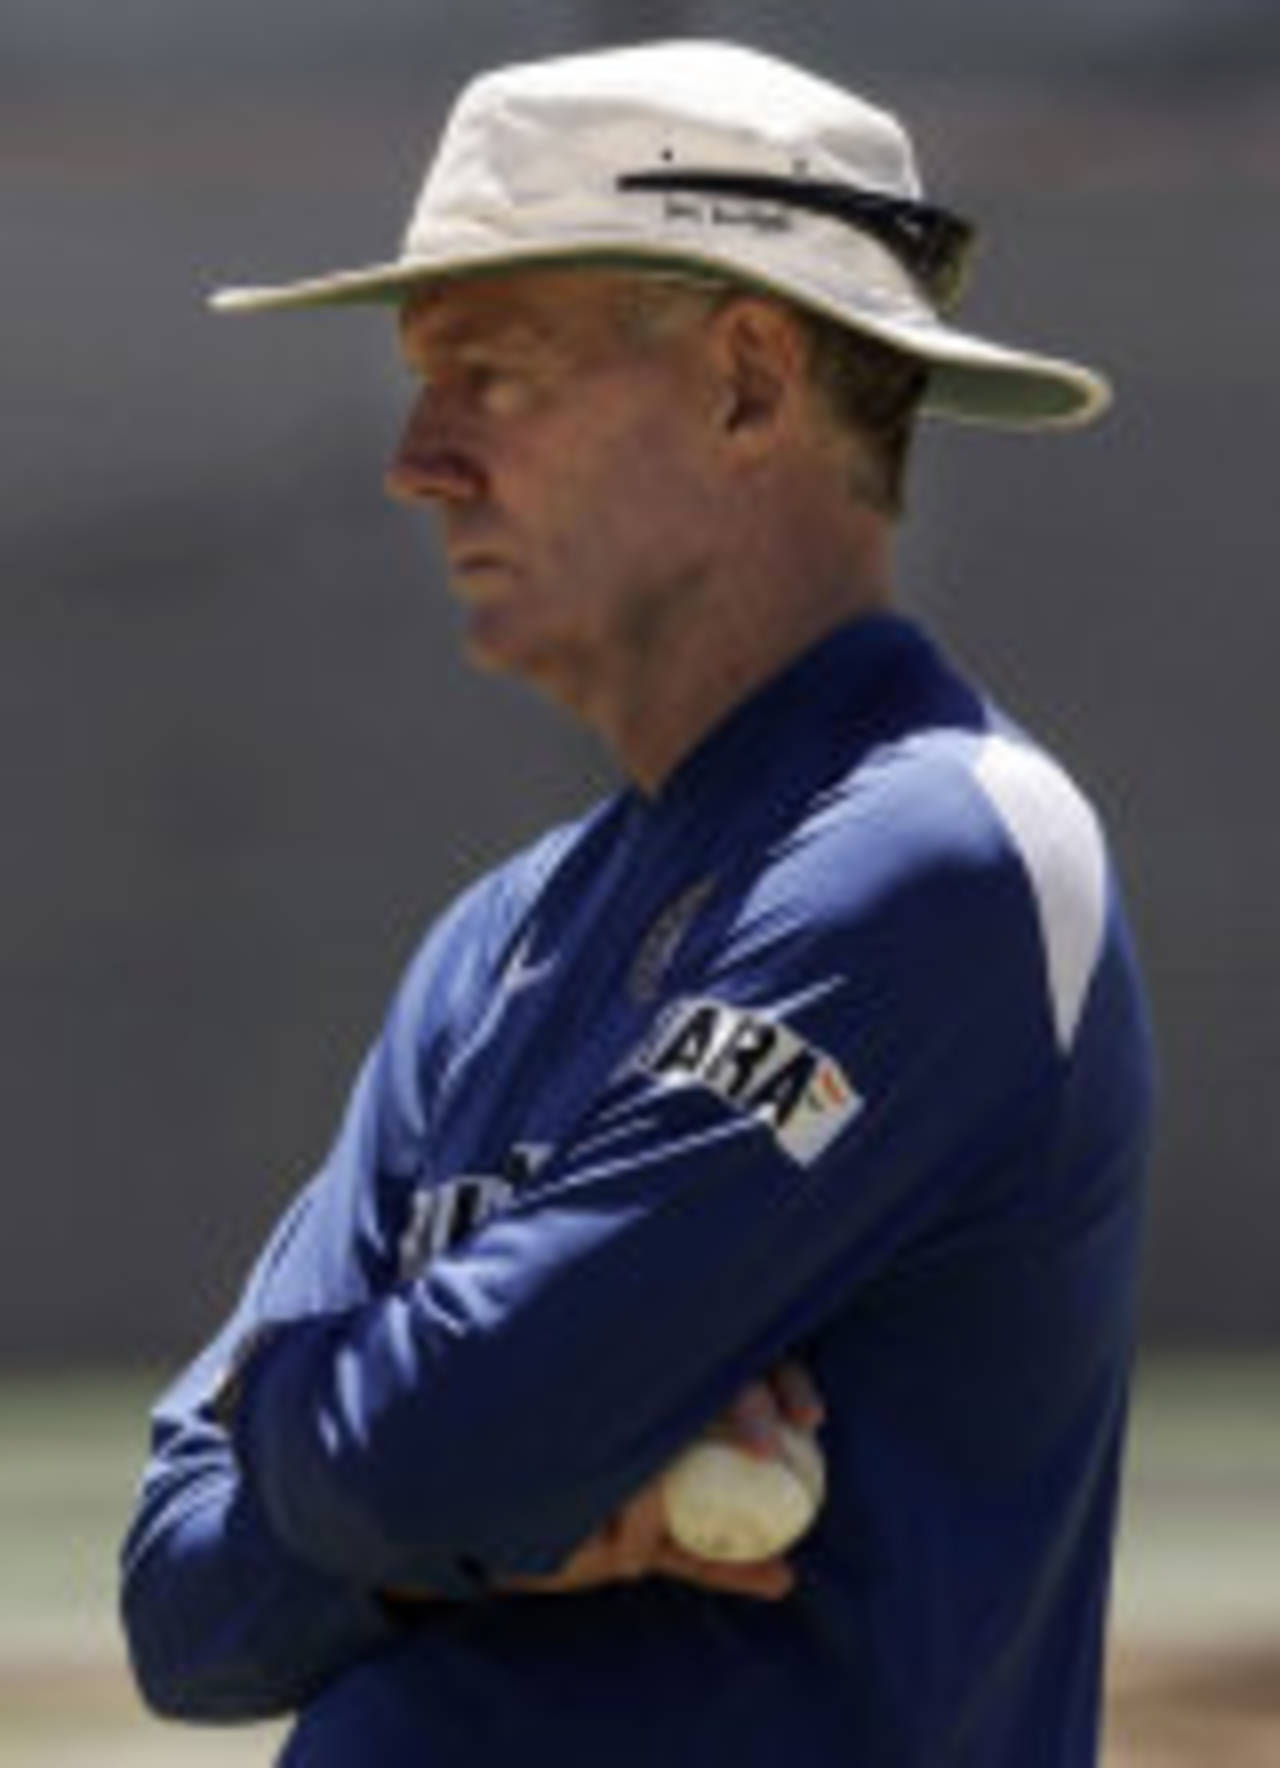 Greg Chappell, India's under-fire coach, oversees a net session at Newlands, Cape Town, November 25, 2006